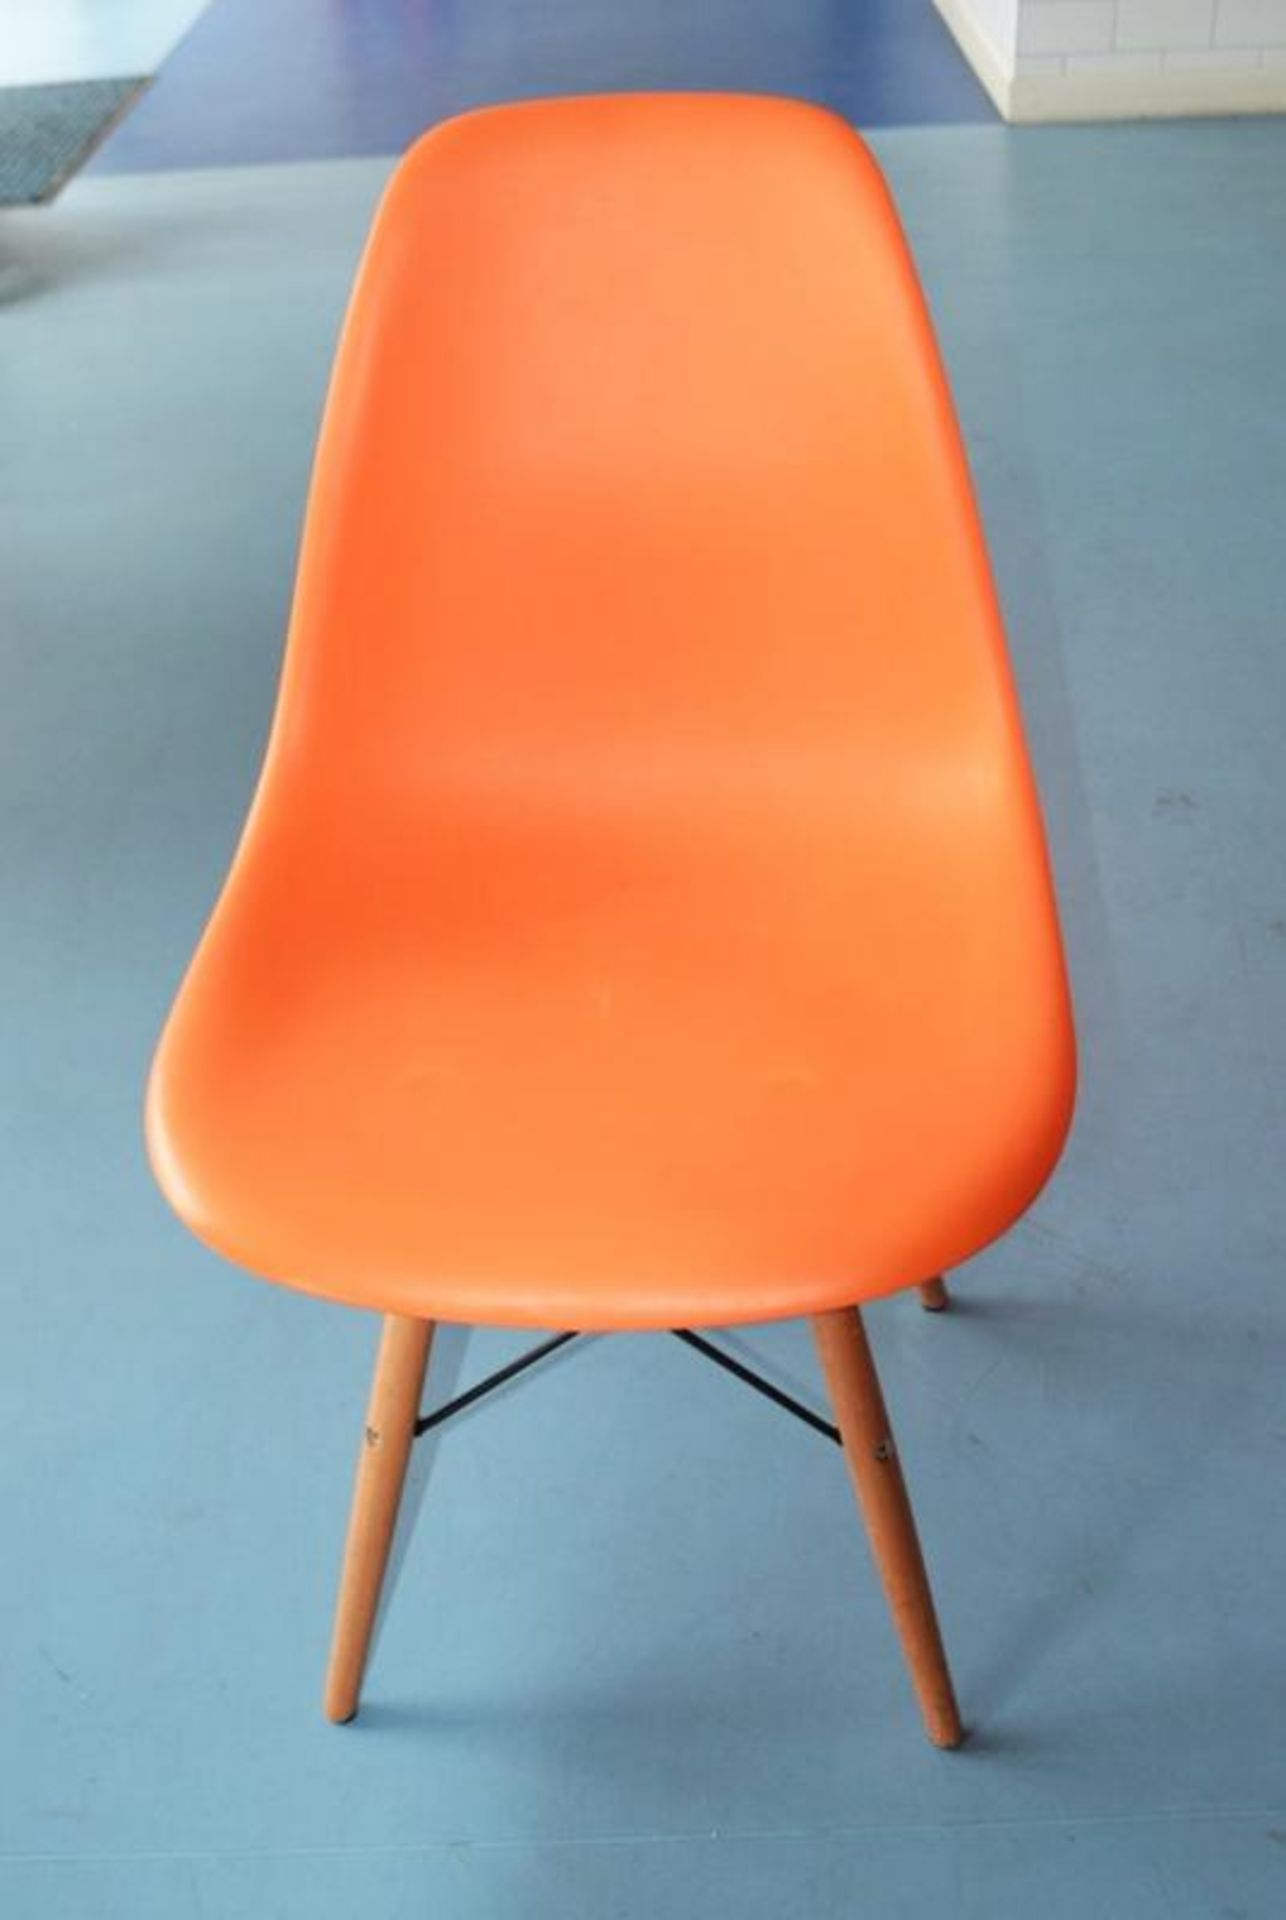 12 x Children's Red and Orange Charles and Ray Eames Style Shell Chairs - CL425 - Location: Altrinch - Image 2 of 9